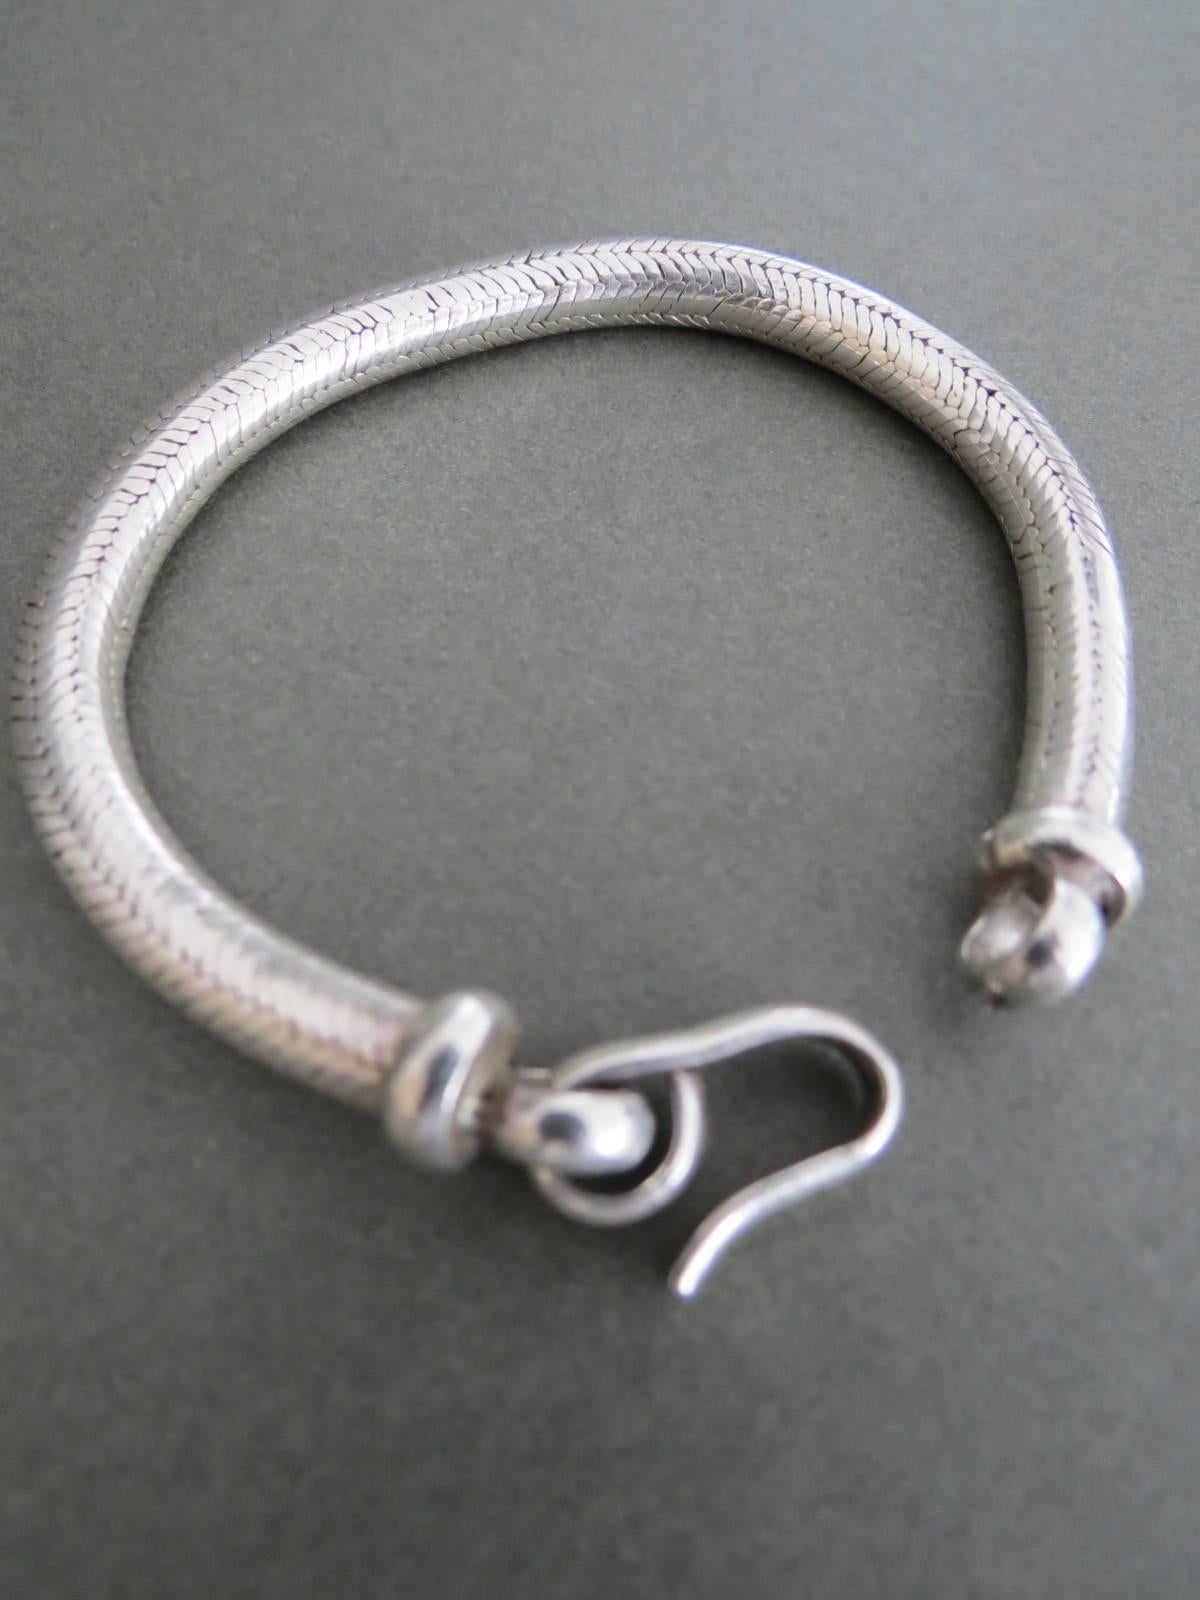 Vintage Large Danish Mid Century Silver Snakeskin Bracelet In Good Condition For Sale In Hove, GB